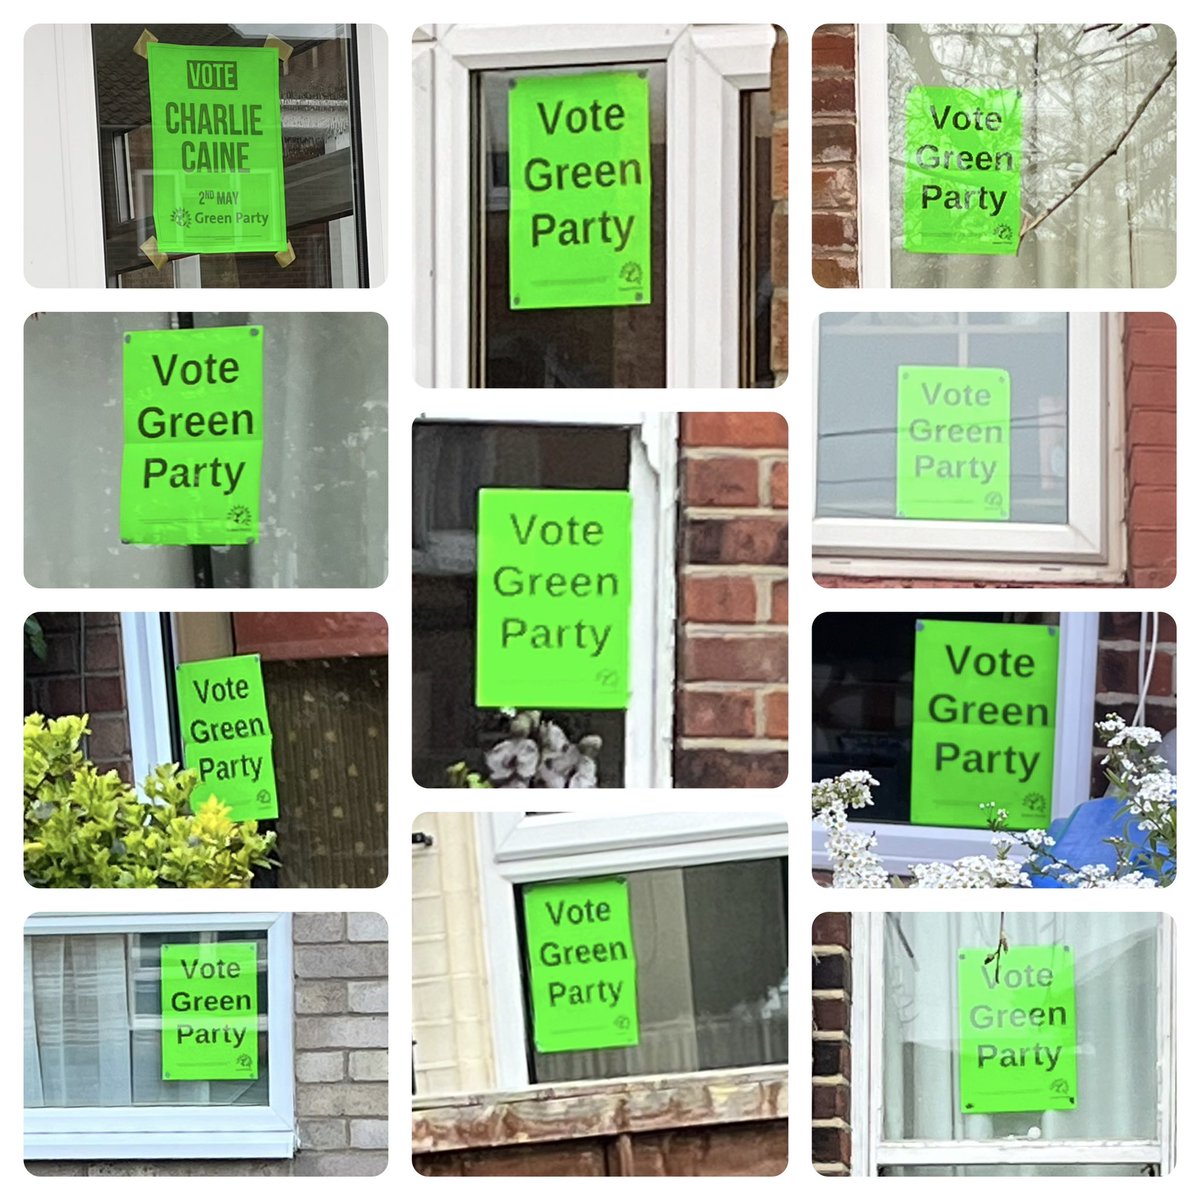 I always love to see people making their own posters before you’ve even knocked on their door! 💚 Although this one is slightly threatening🤣 It’s great to see @NorwichGreens posters start going up in the city all the way from Lakenham to Mile Cross and more! #GetGreensElected